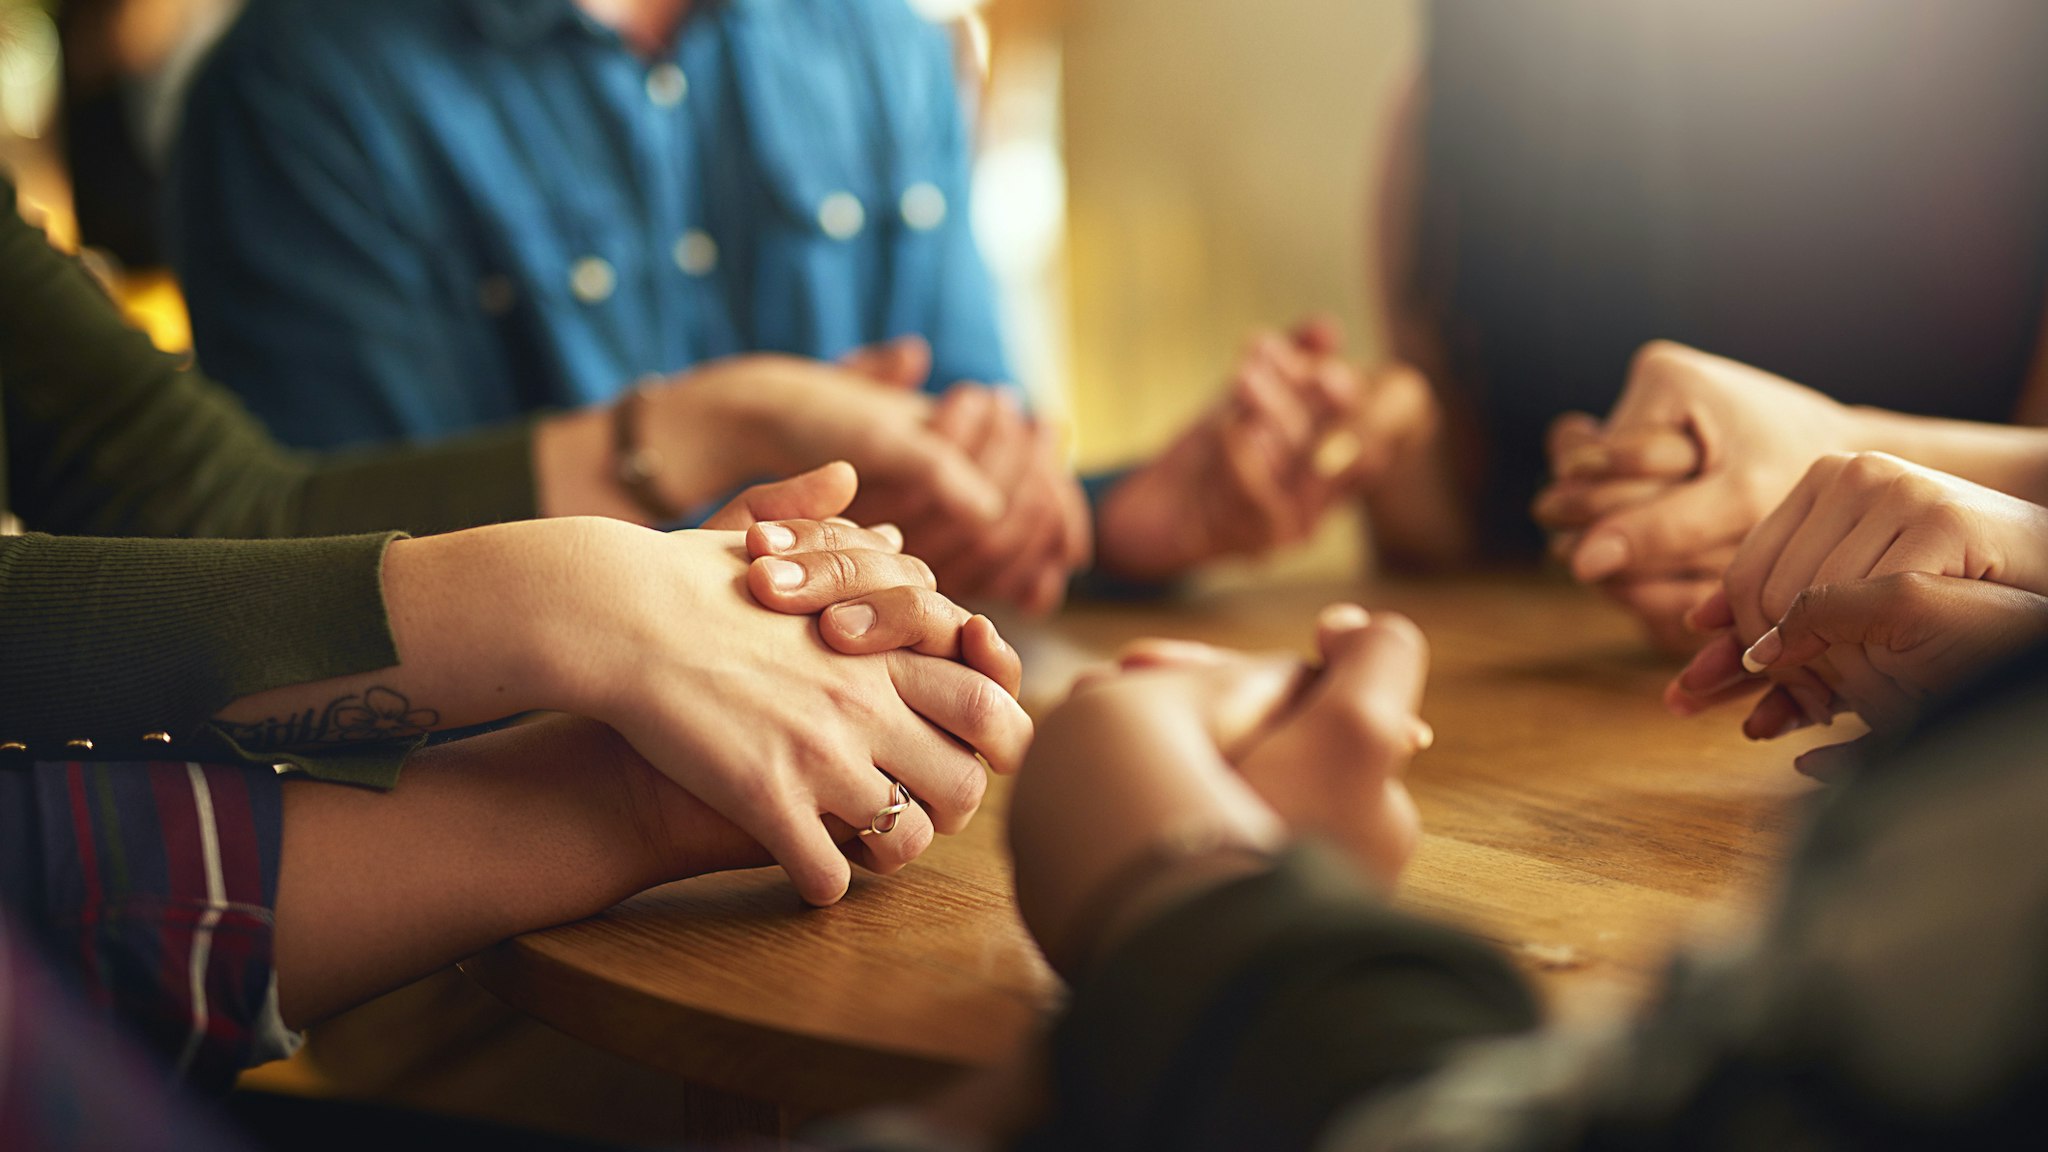 Shot of a group of people holding hands and praying together